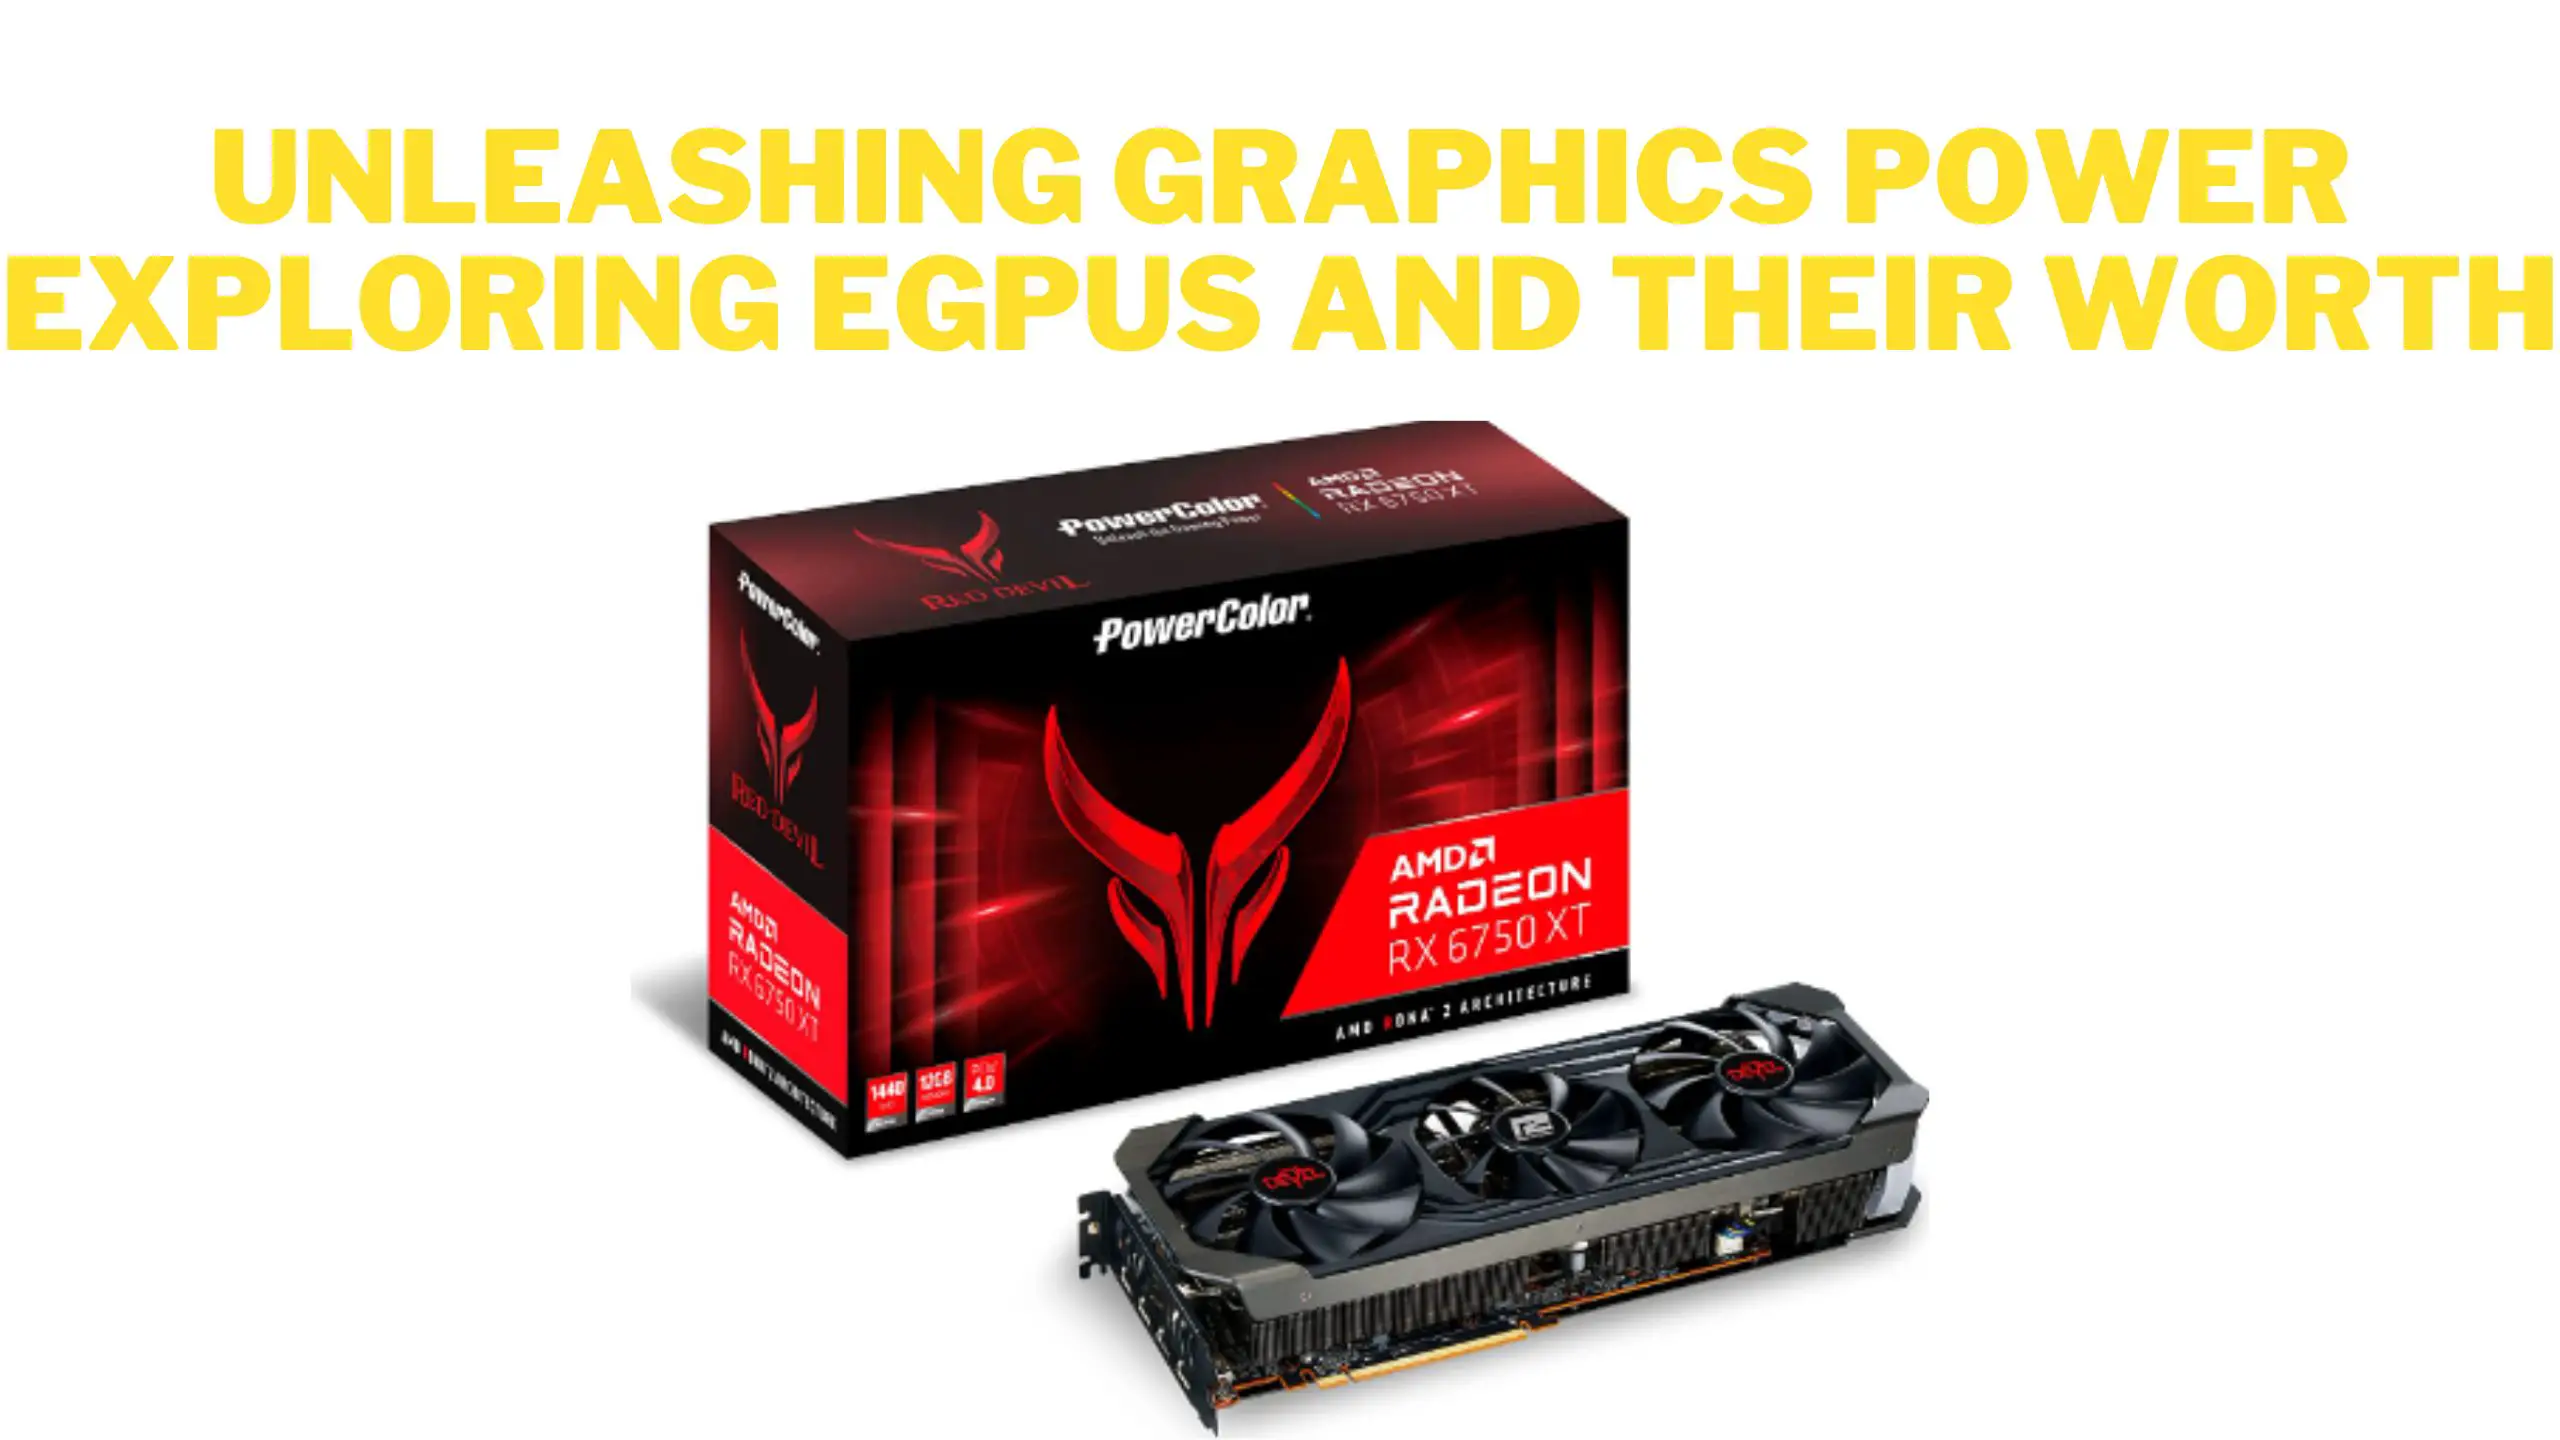 Unleashing Graphics Power Exploring eGPUs and Their Worth